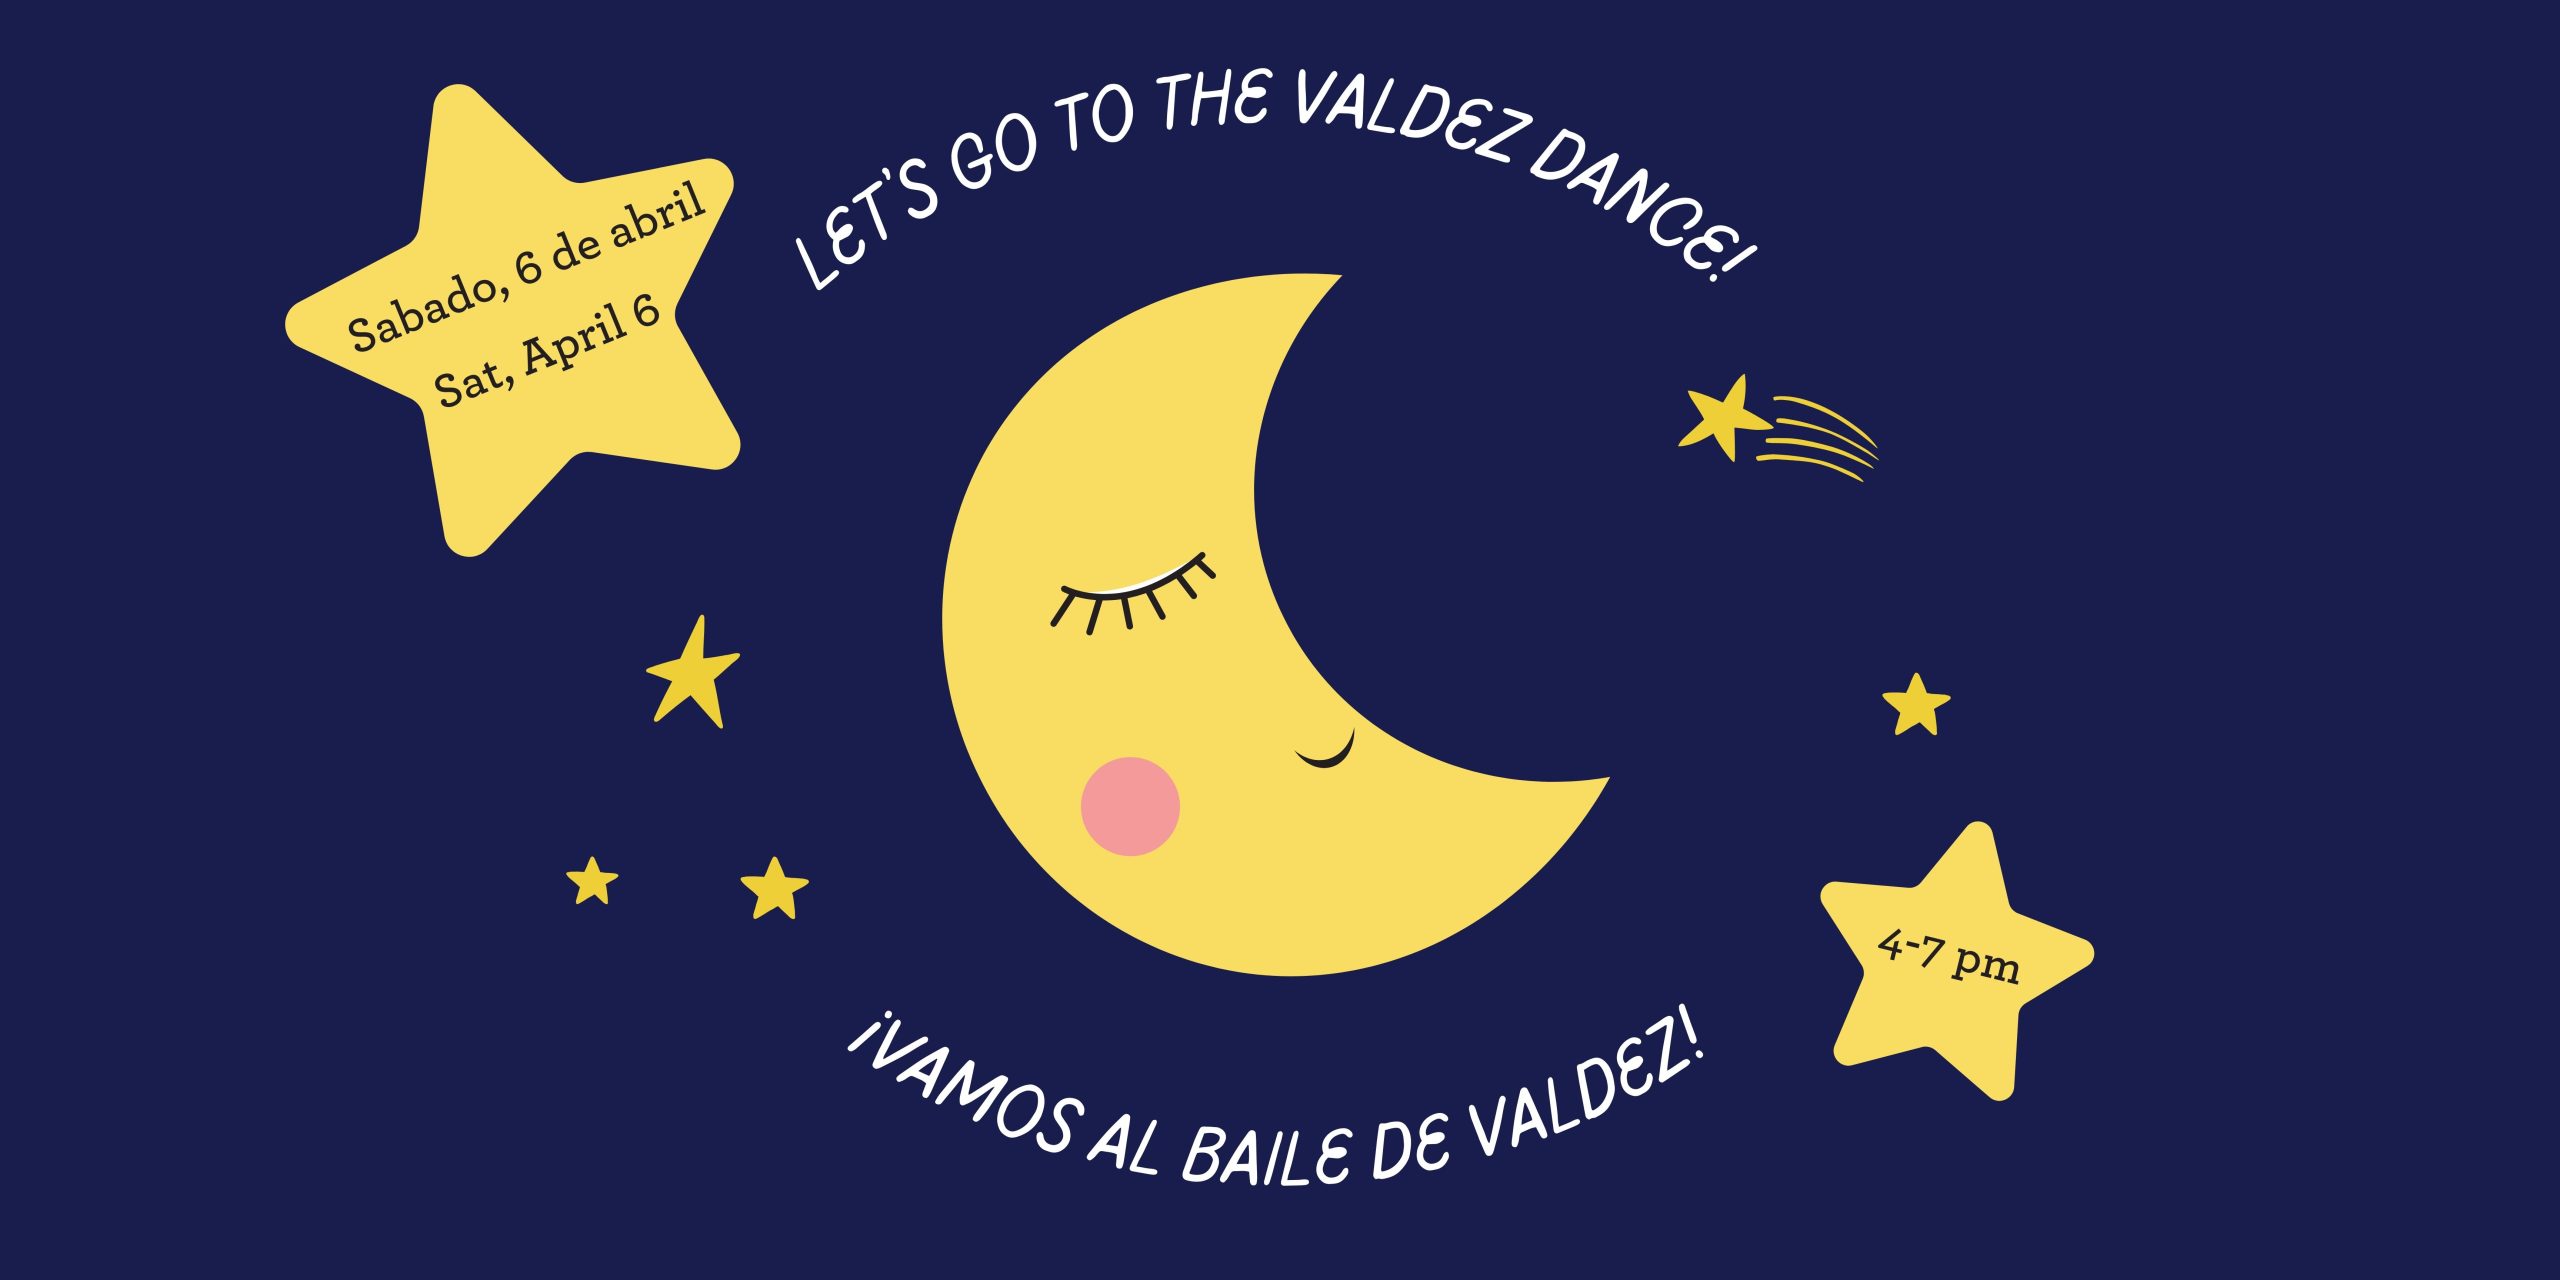 Dark blue background with yellow moon smiling and yellow stars around it. White text surrounding moon says, "Let's go to the Valdez dance!" and "¡Vamos al baile de Valdez!" Yellow stars with black text says, "Saturday, April 6. Sabado, 6 de abril, 4-7pm"